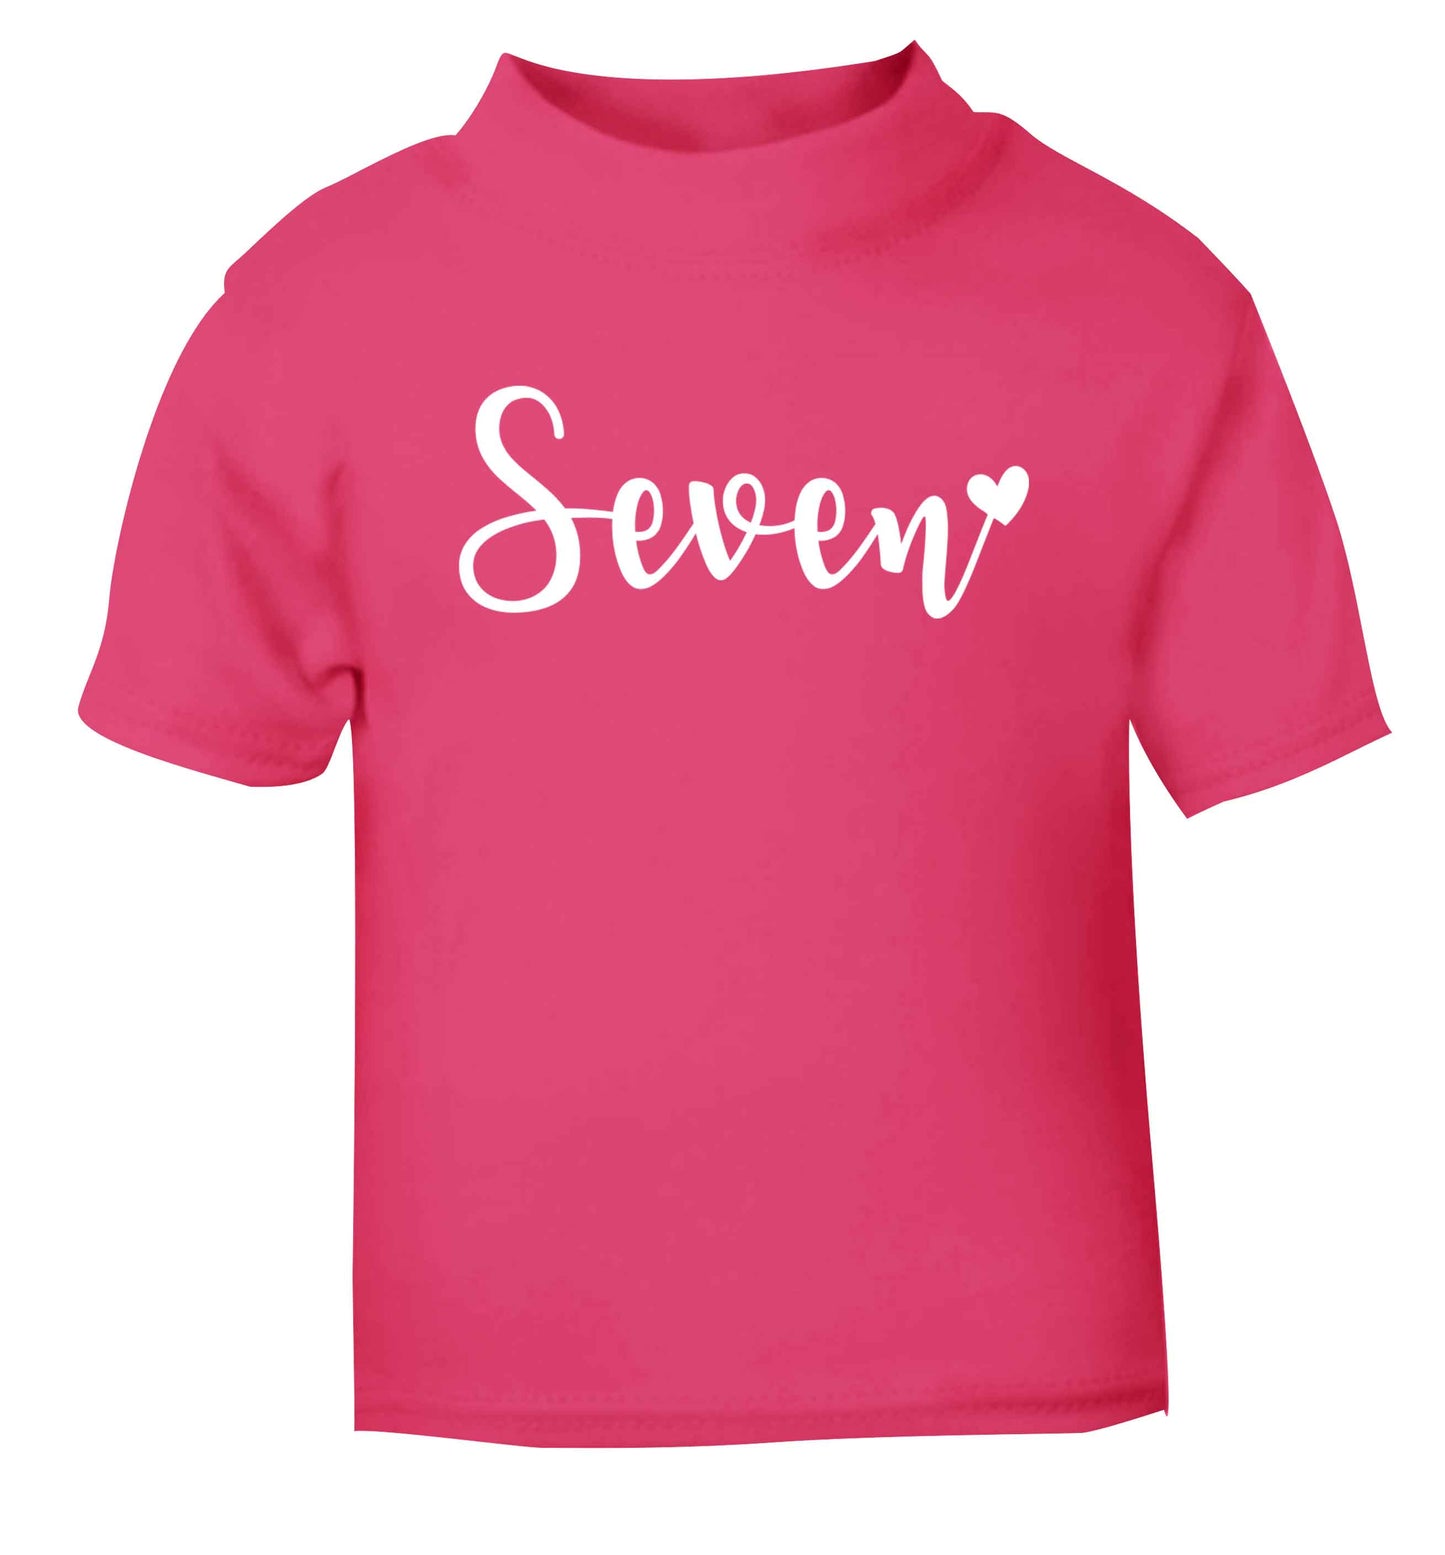 Seven and heart pink baby toddler Tshirt 2 Years